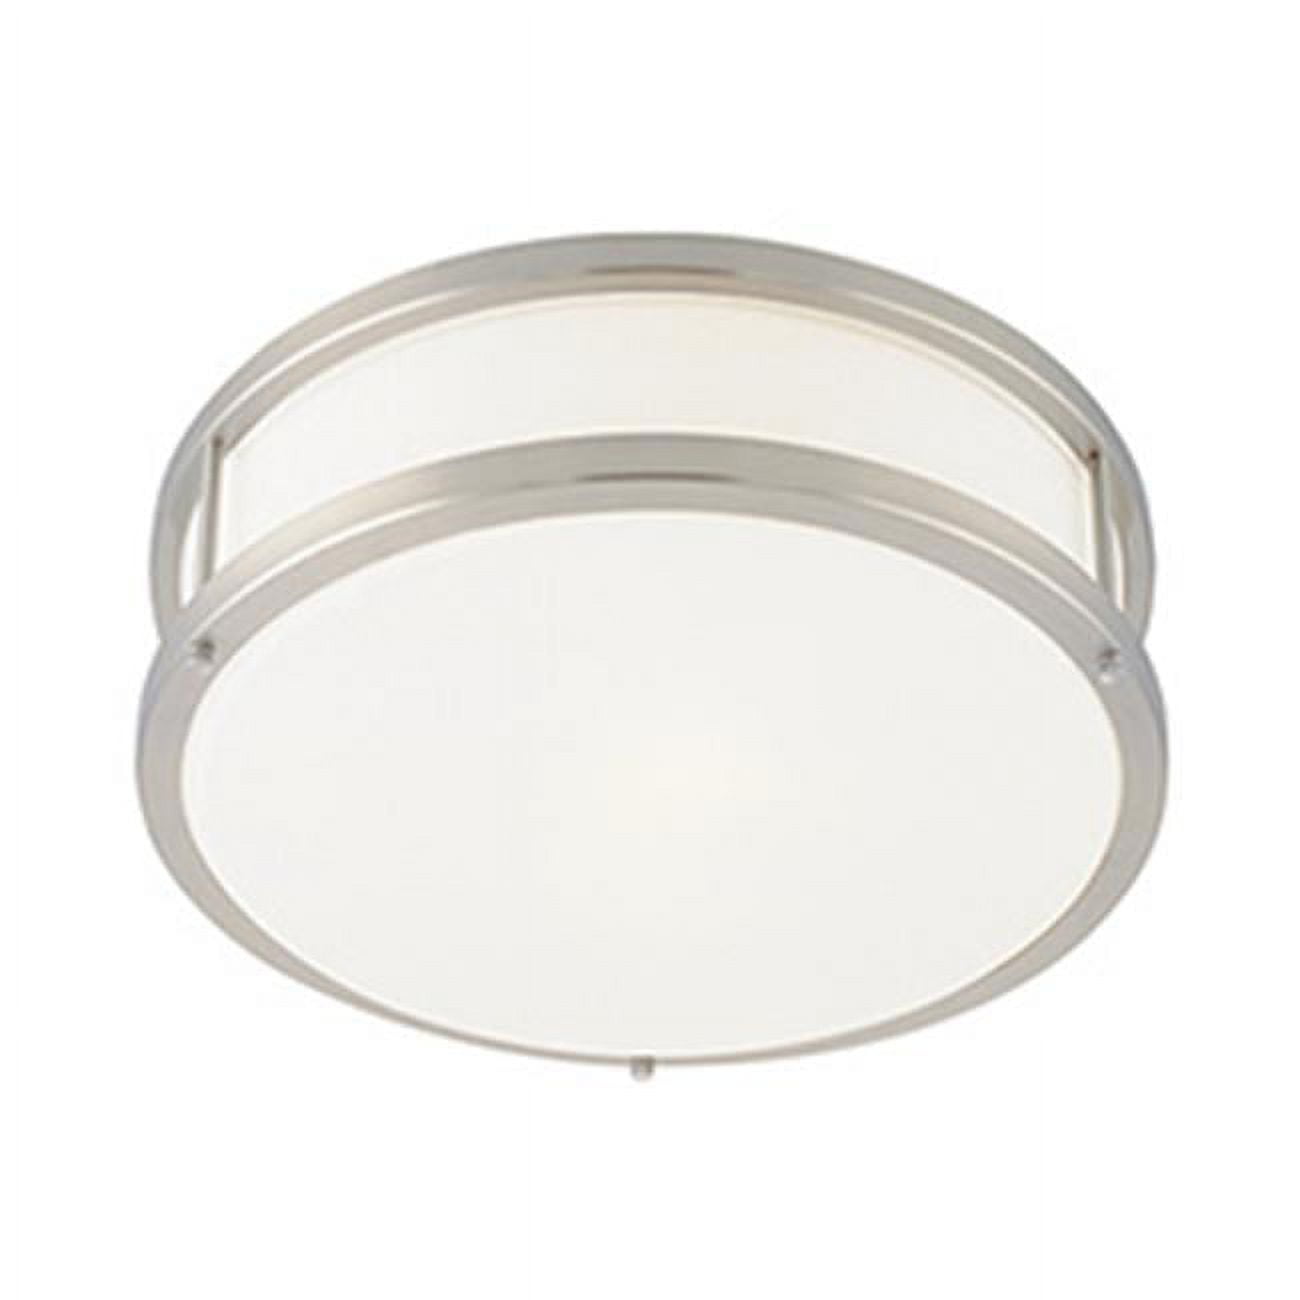 Picture of Access lighting 50079LEDDLP-BS-OPL 4.5 x 12 in. Conga Flush Mount, Brushed Steel